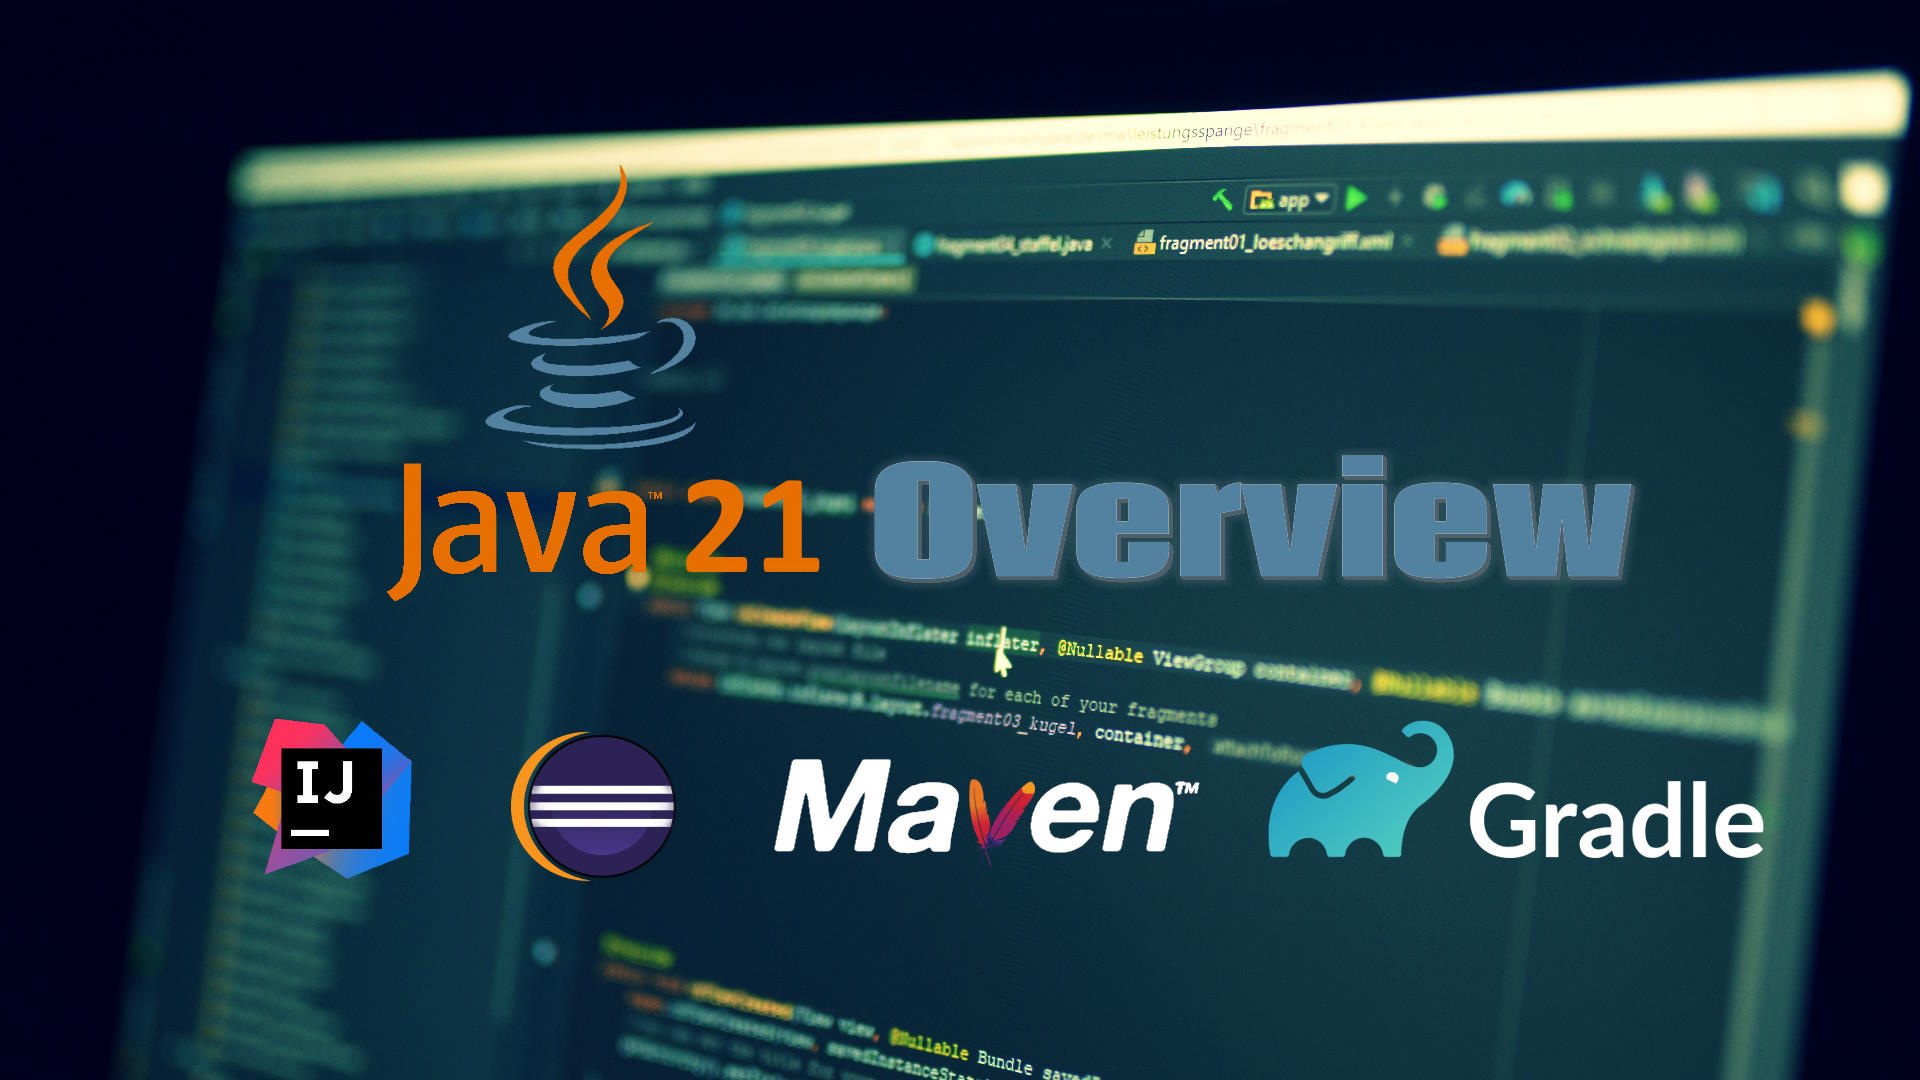 Java 21 overview